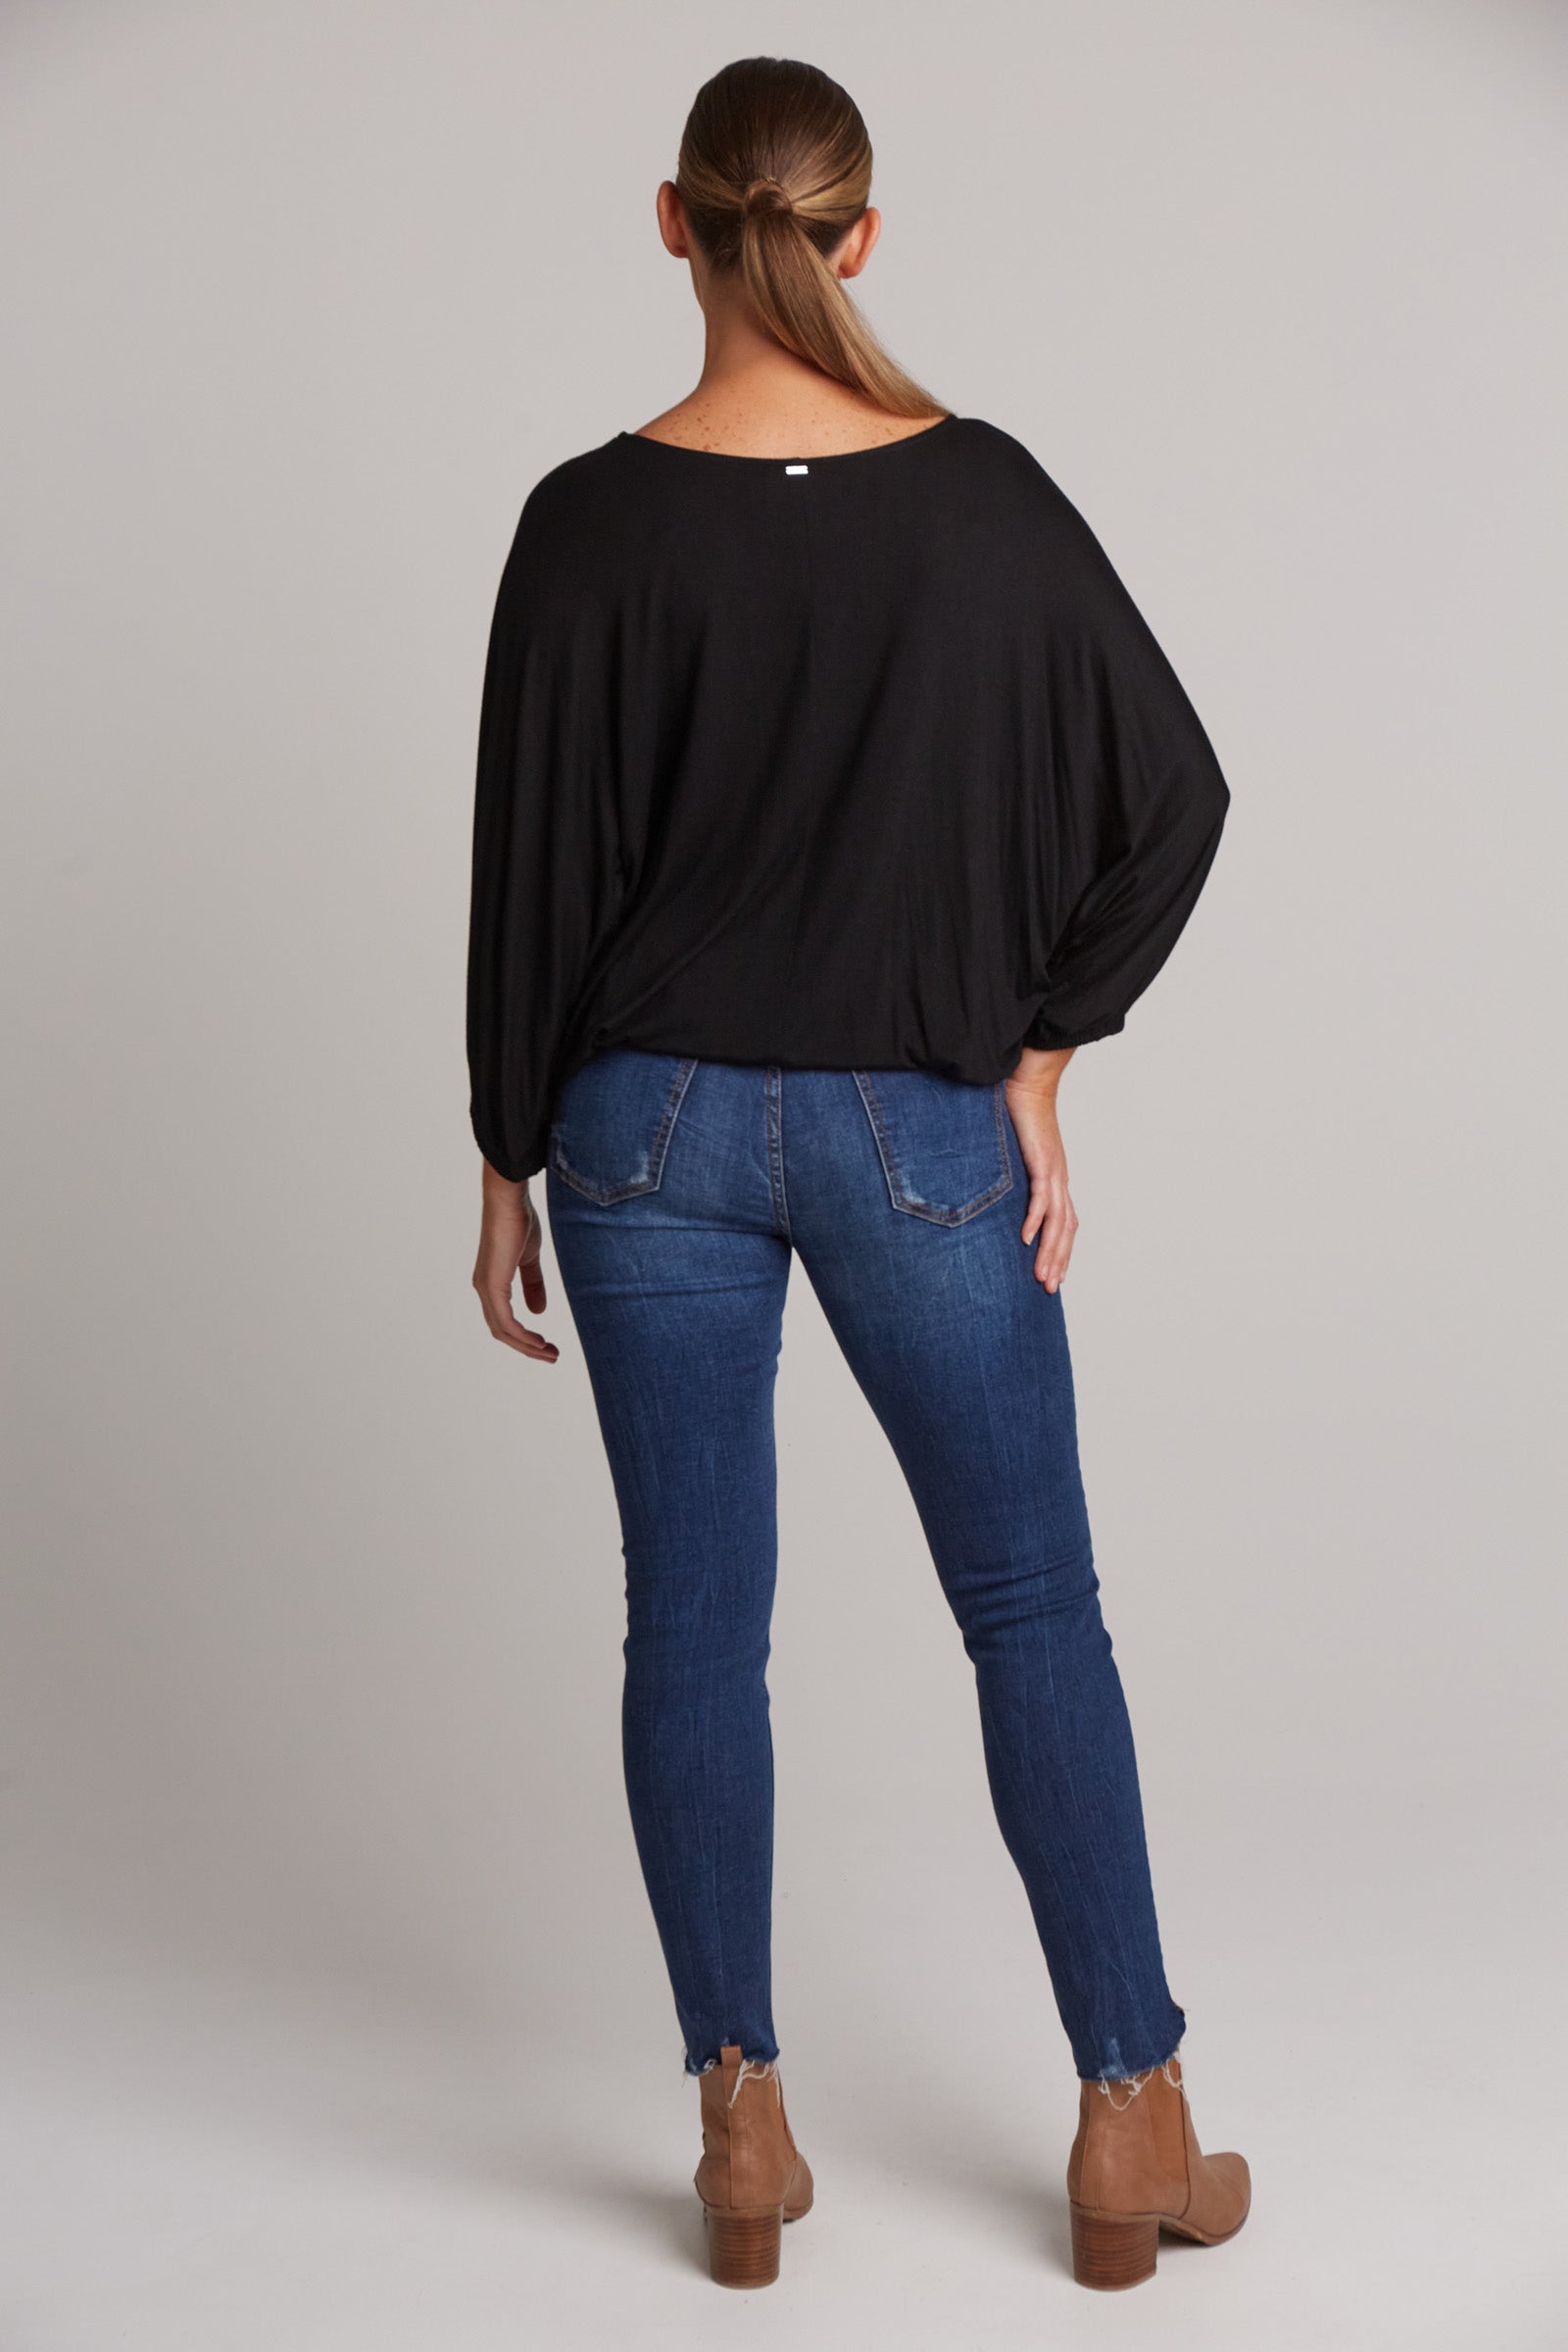 Studio Jersey Relaxed Top - Ebony - eb&ive Clothing - Top 3/4 Sleeve Jersey